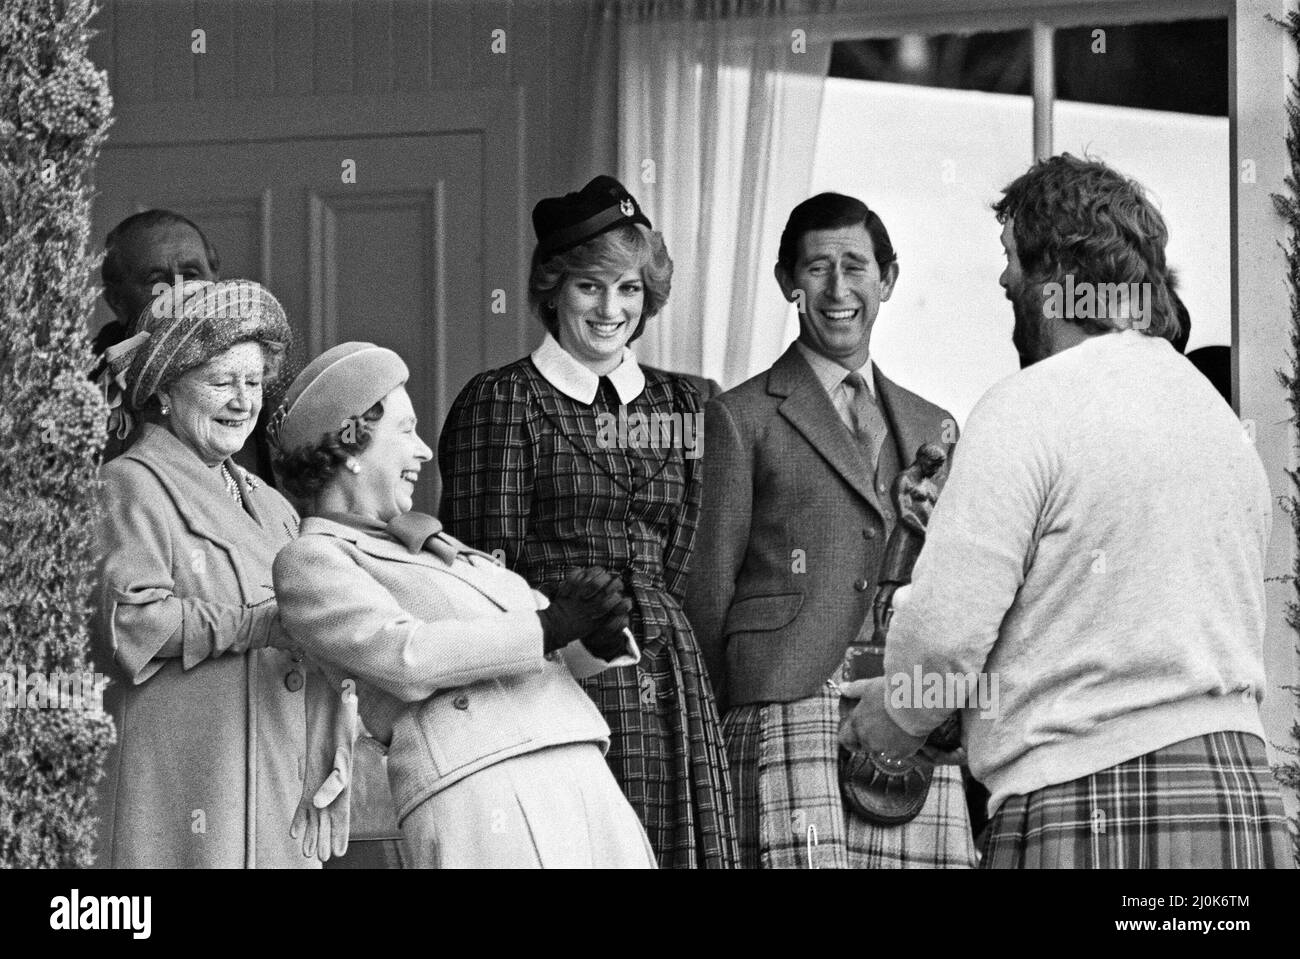 The Royal family share a joke with Geoff Capes as they attend the Braemar Highland Games in Scotland. Left to right are: The Queen Mother, Queen Elizabeth II, Princess Diana, Prince Charles and Geoff Capes. 4th September 1982. Stock Photo